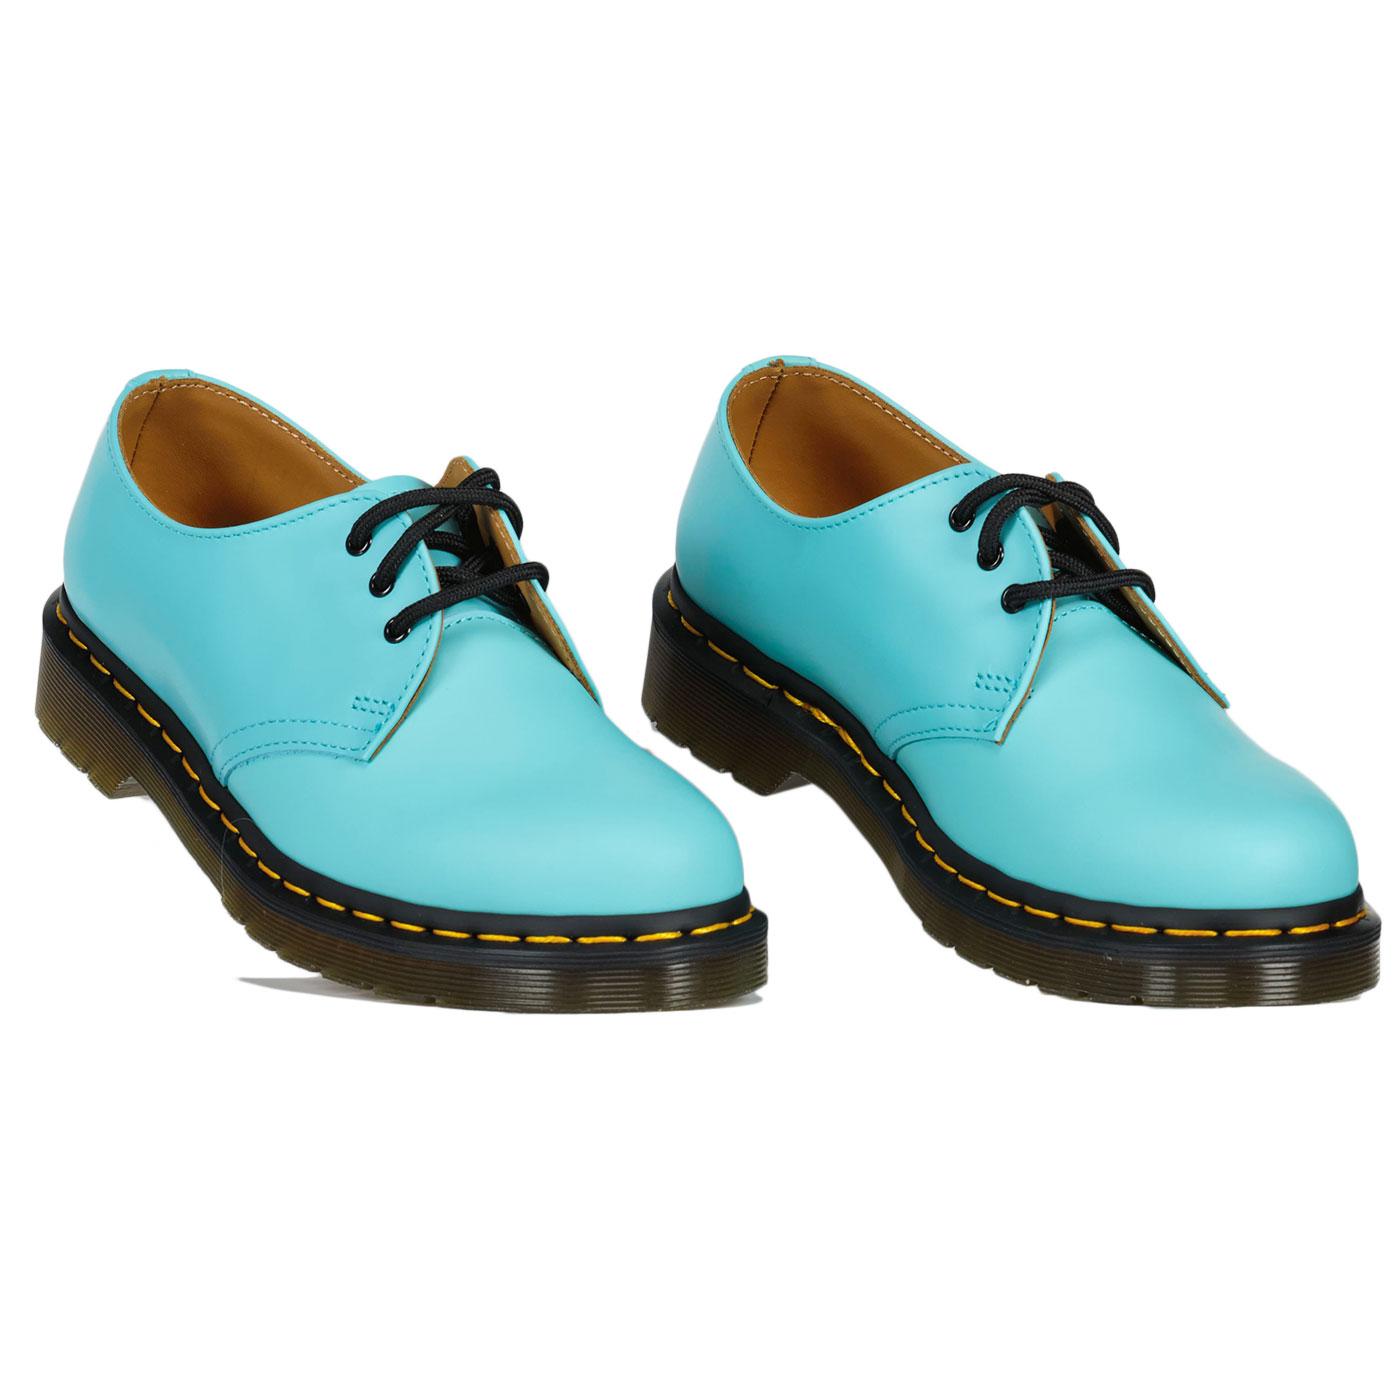 DR MARTENS 1461 Men's 70s Retro 3 Eye Shoes in Turquoise